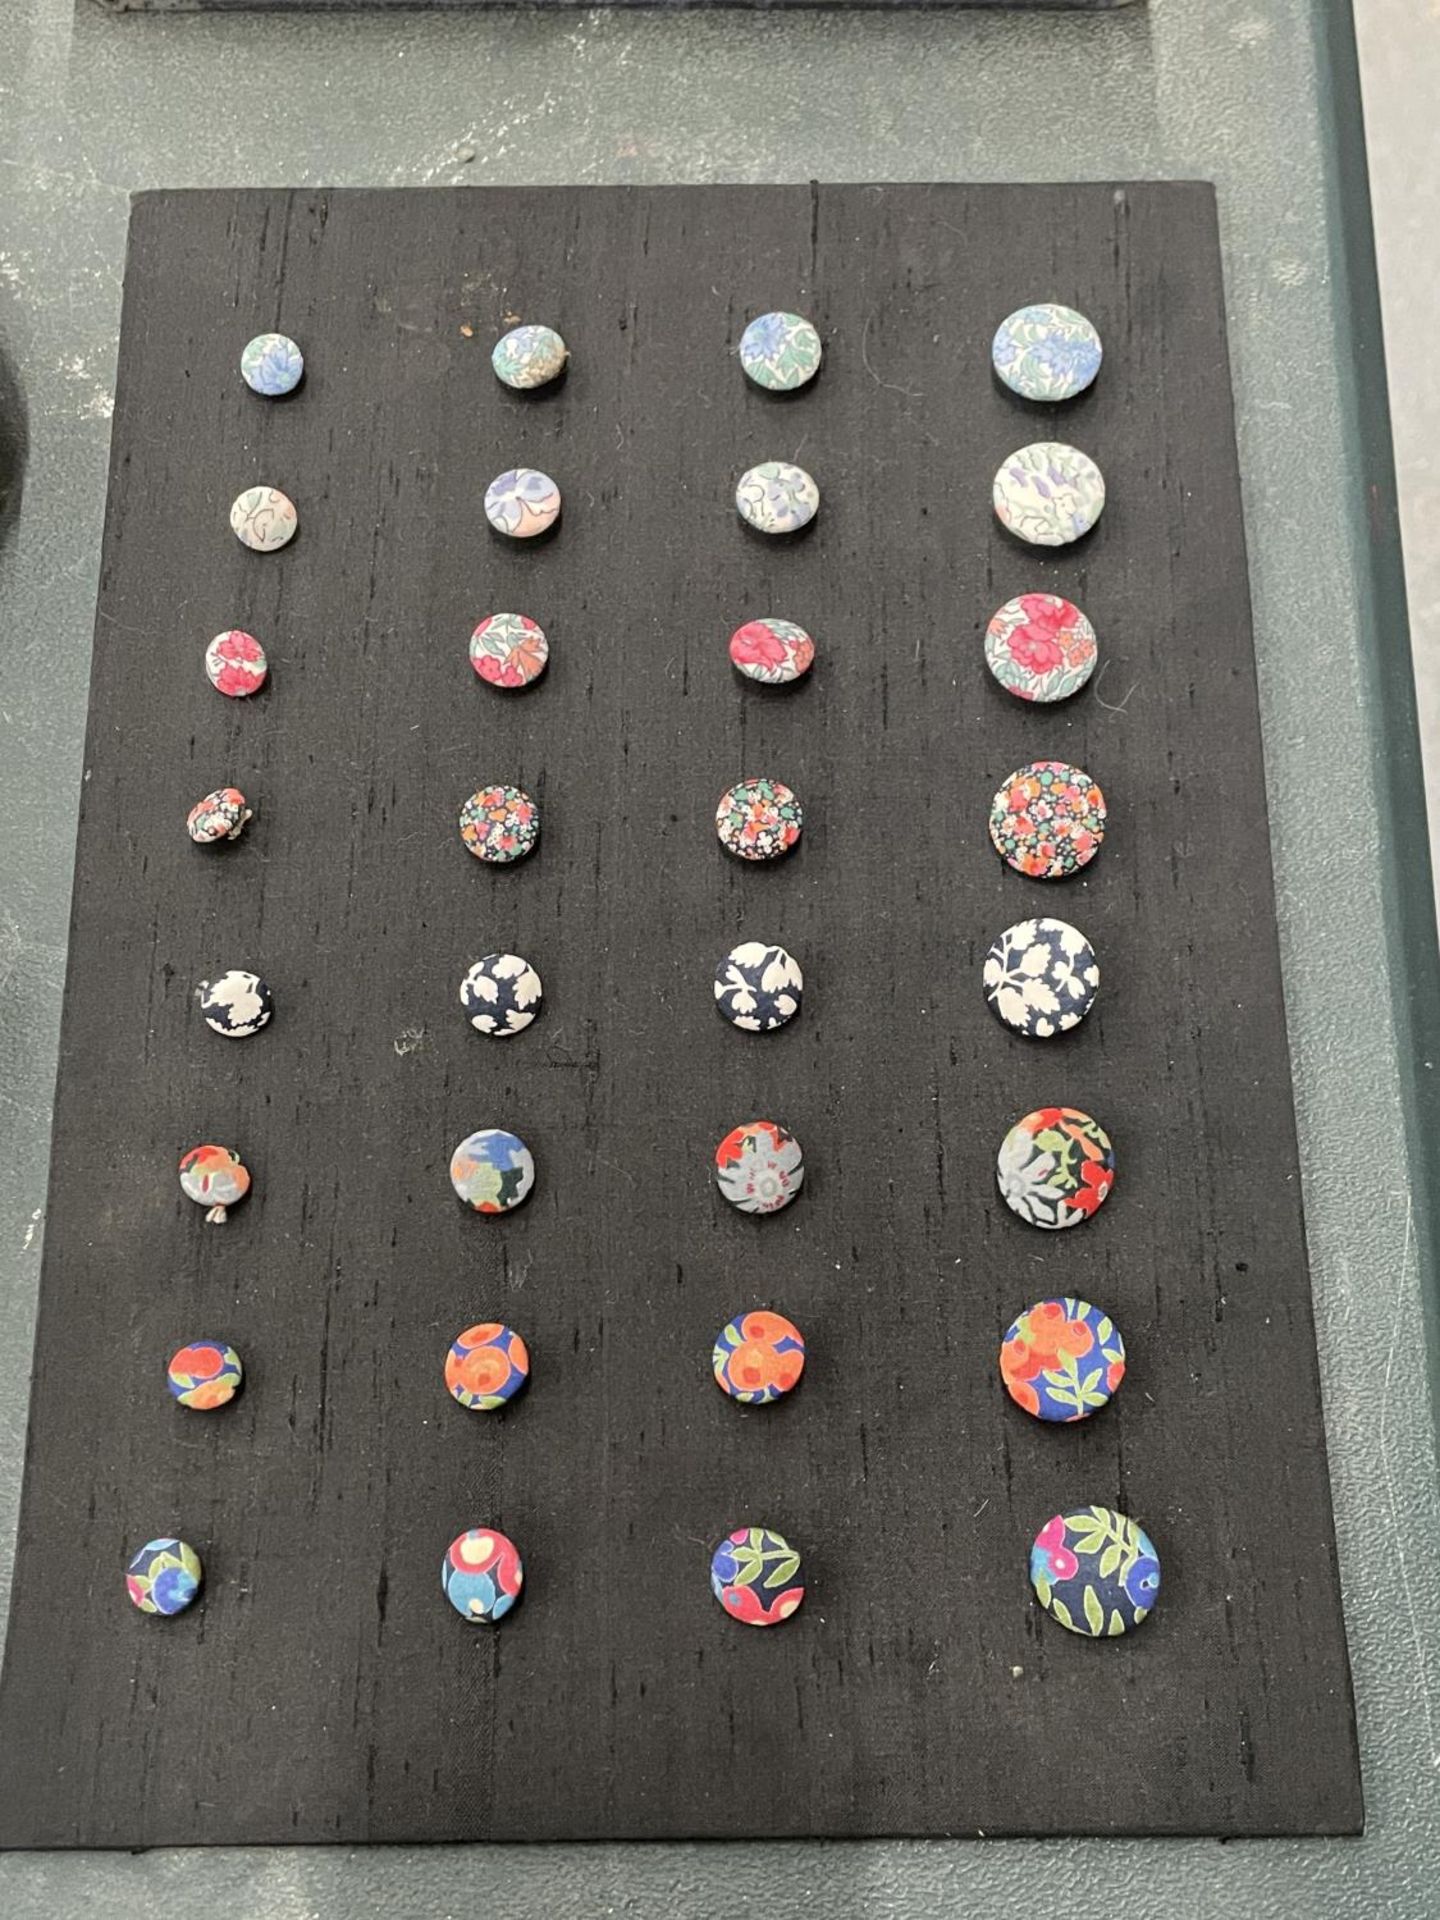 A DISPLAY OF VINTAGE 'TANA LAWN' LIBERTY BUTTONS